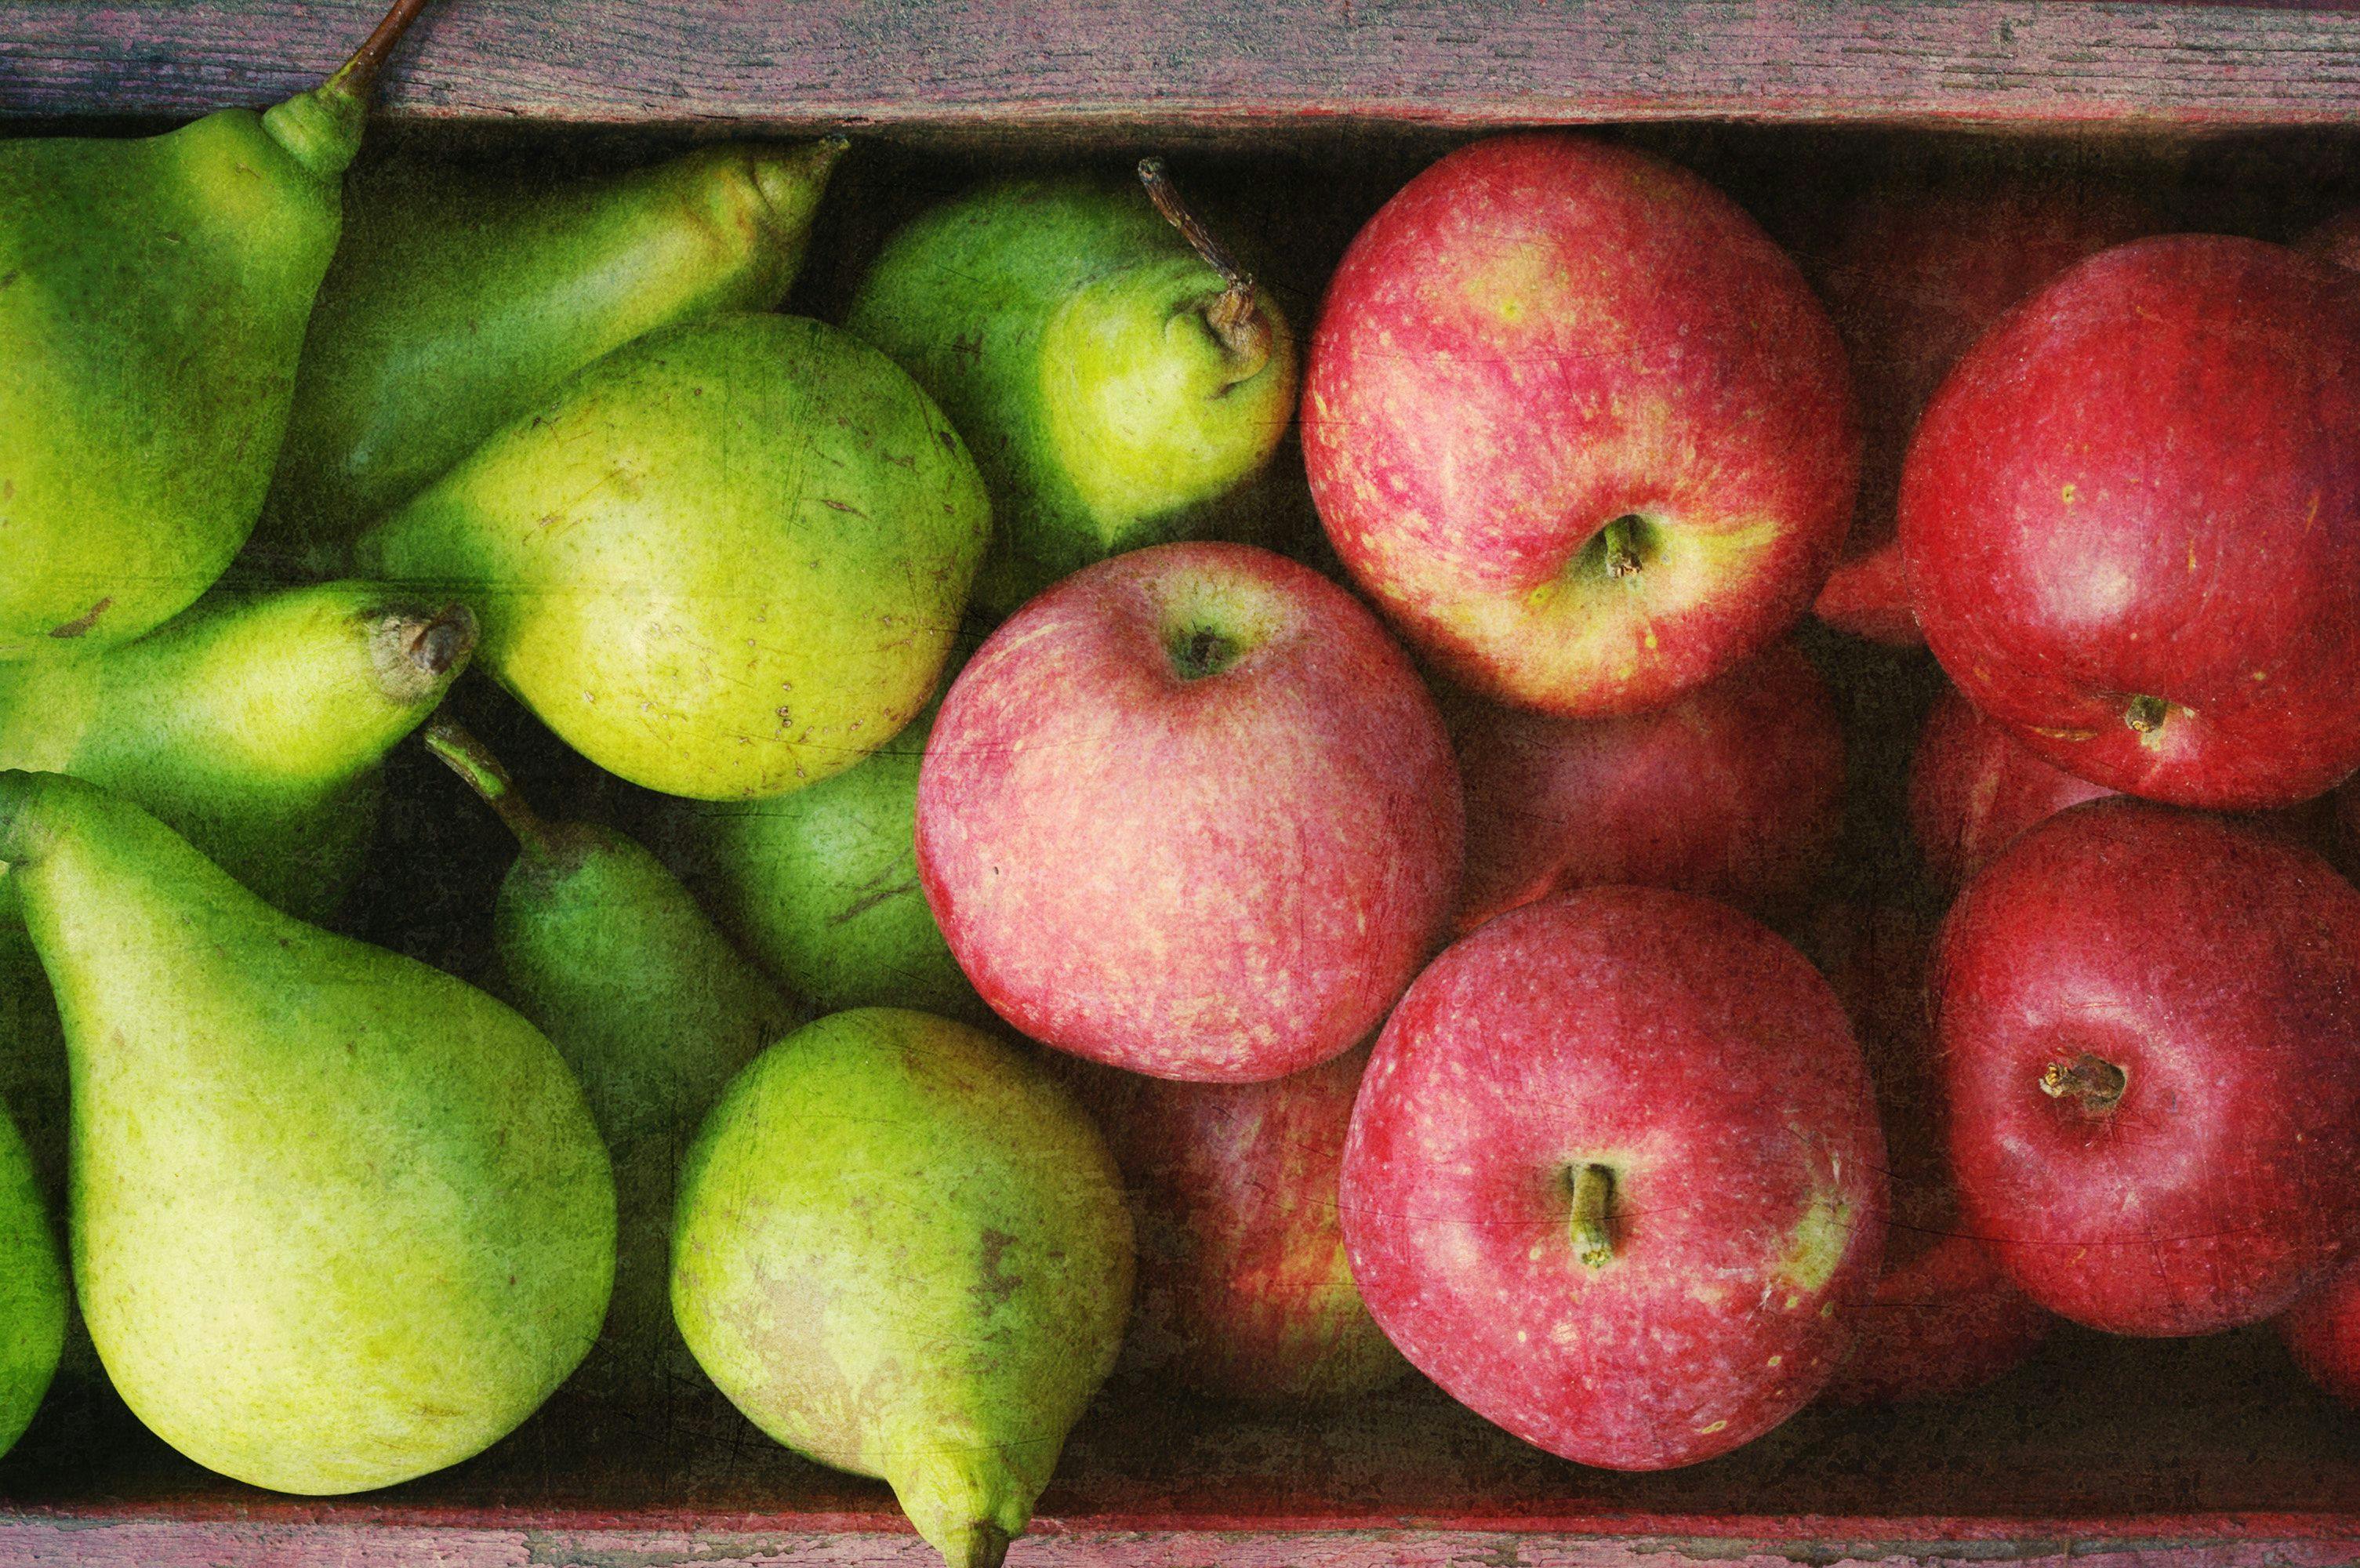 Ripe green pears and red apples in a wooden box with grunge texture, top view. Autumn harvest of pears | Image Credit: © isavira - stock.adobe.com